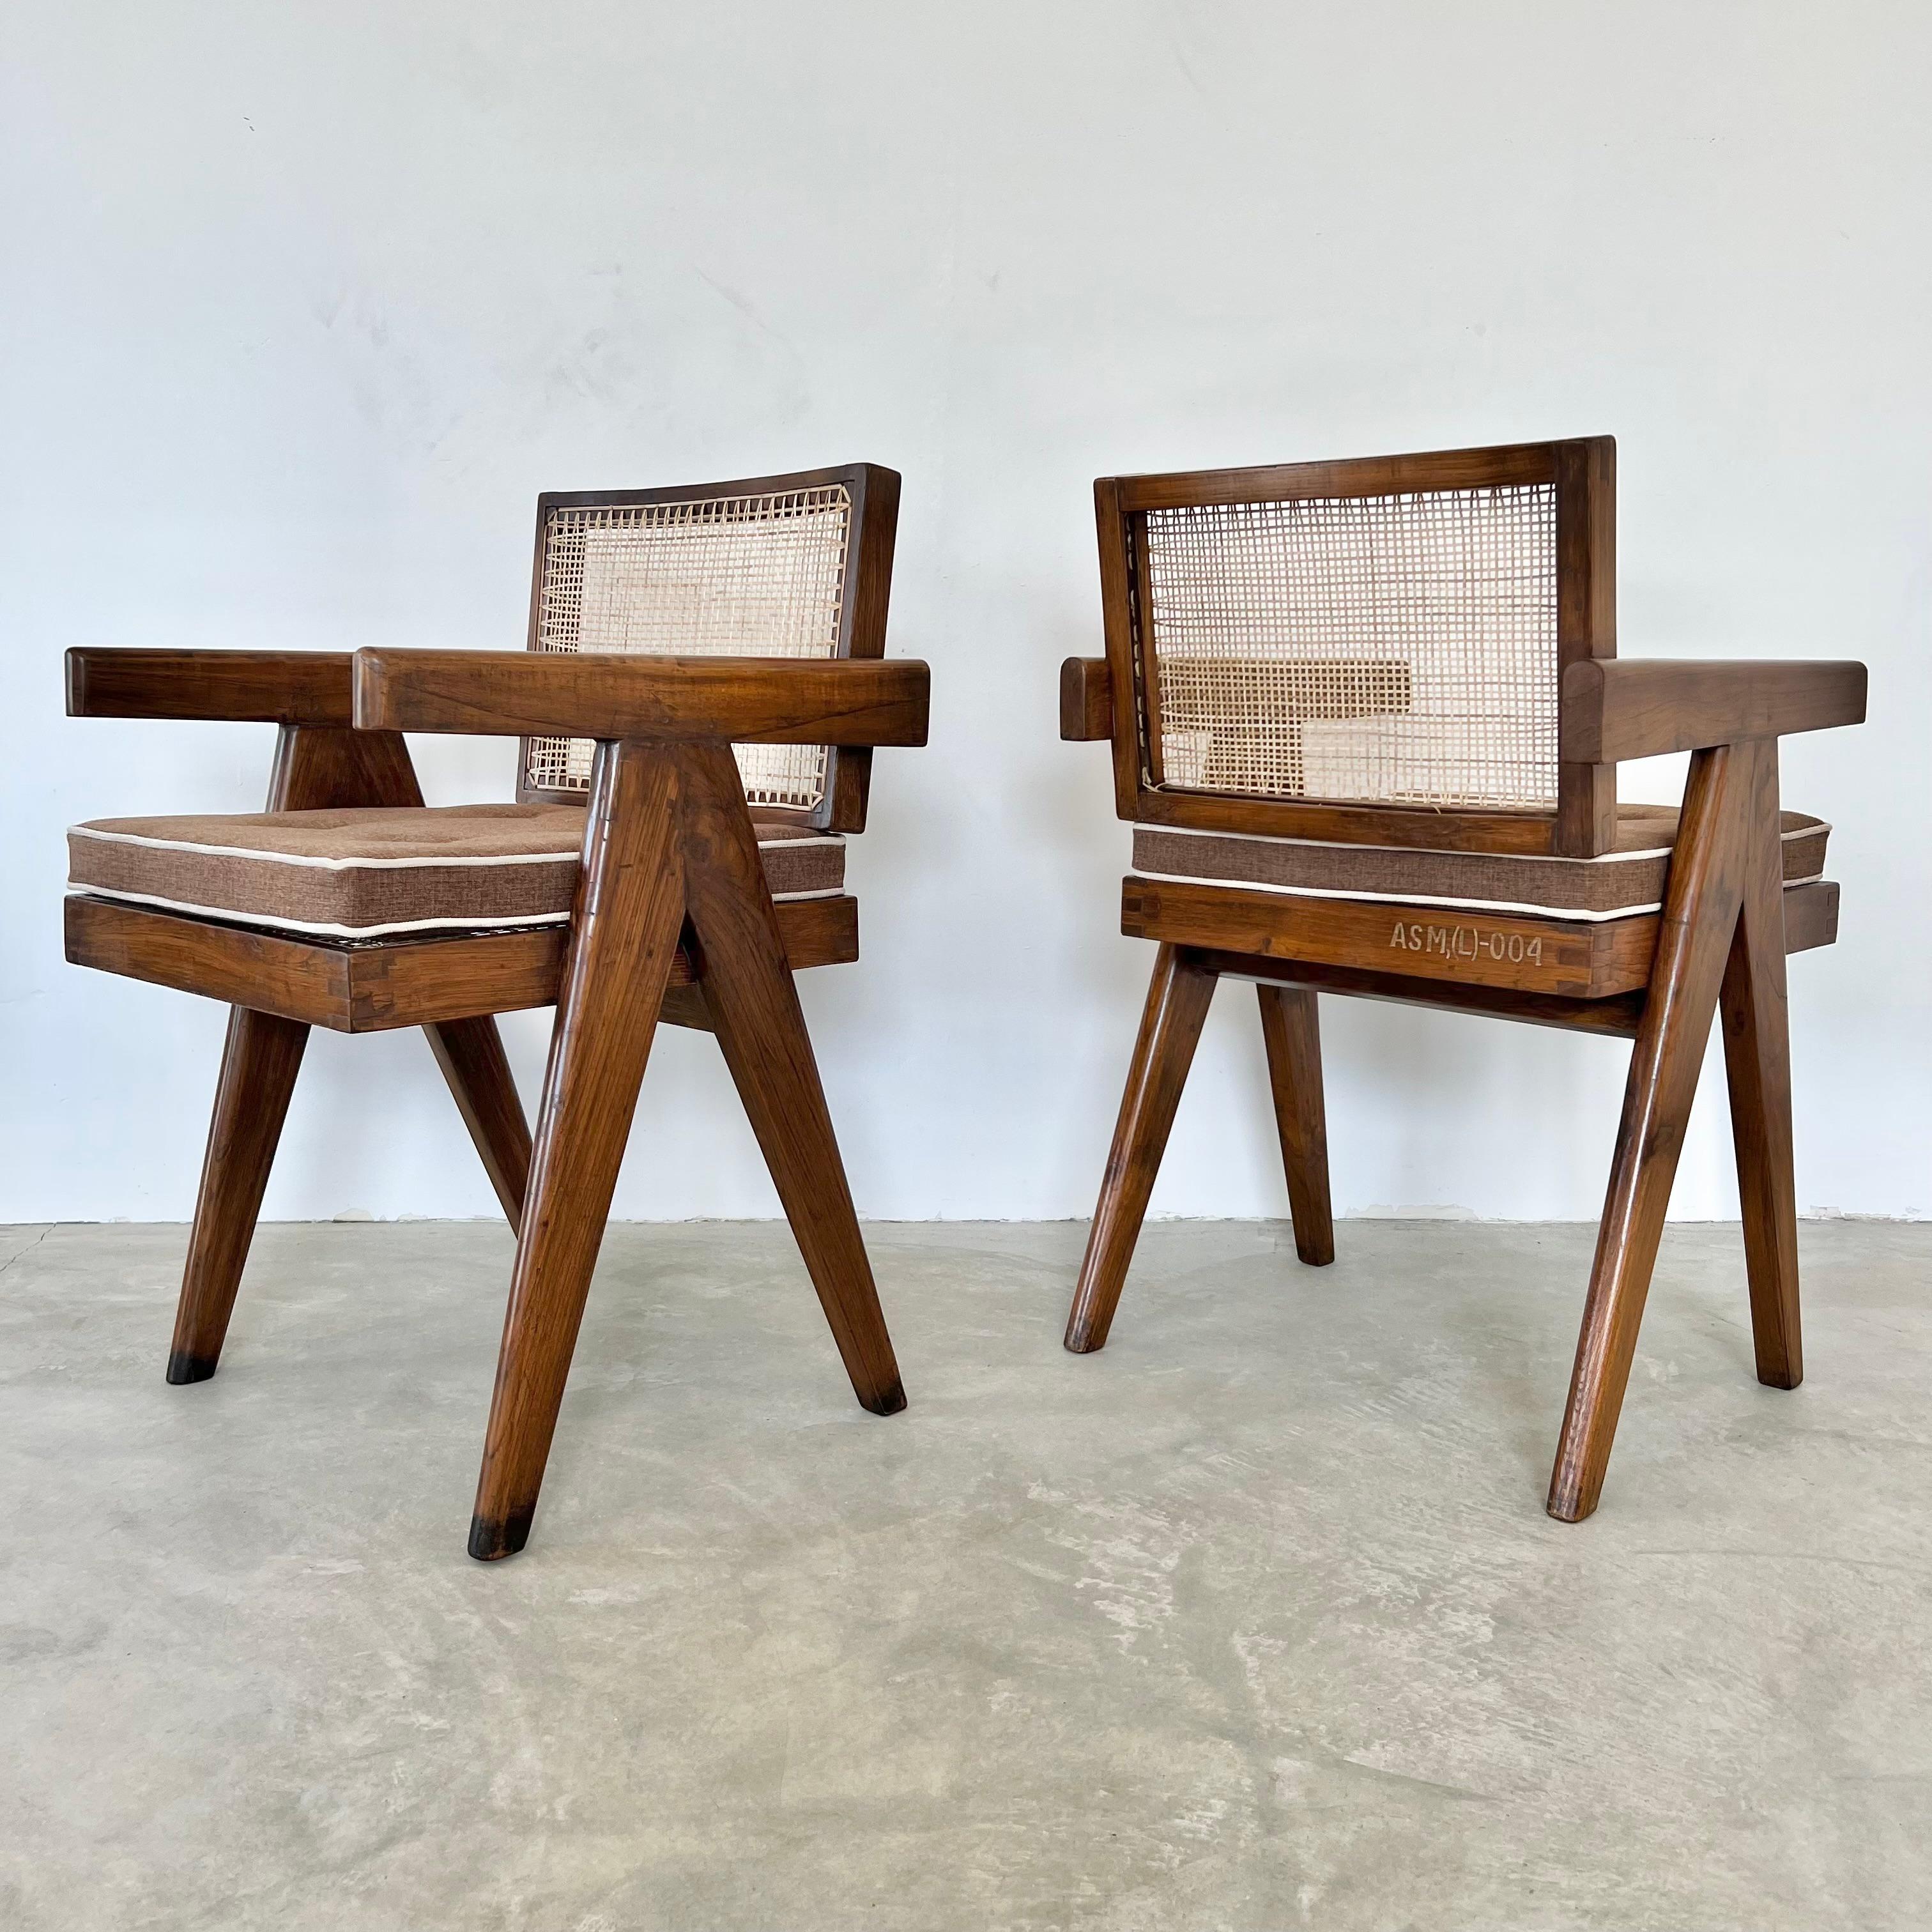 Pierre Jeanneret Office Chairs, 1950s Chandigargh For Sale 2